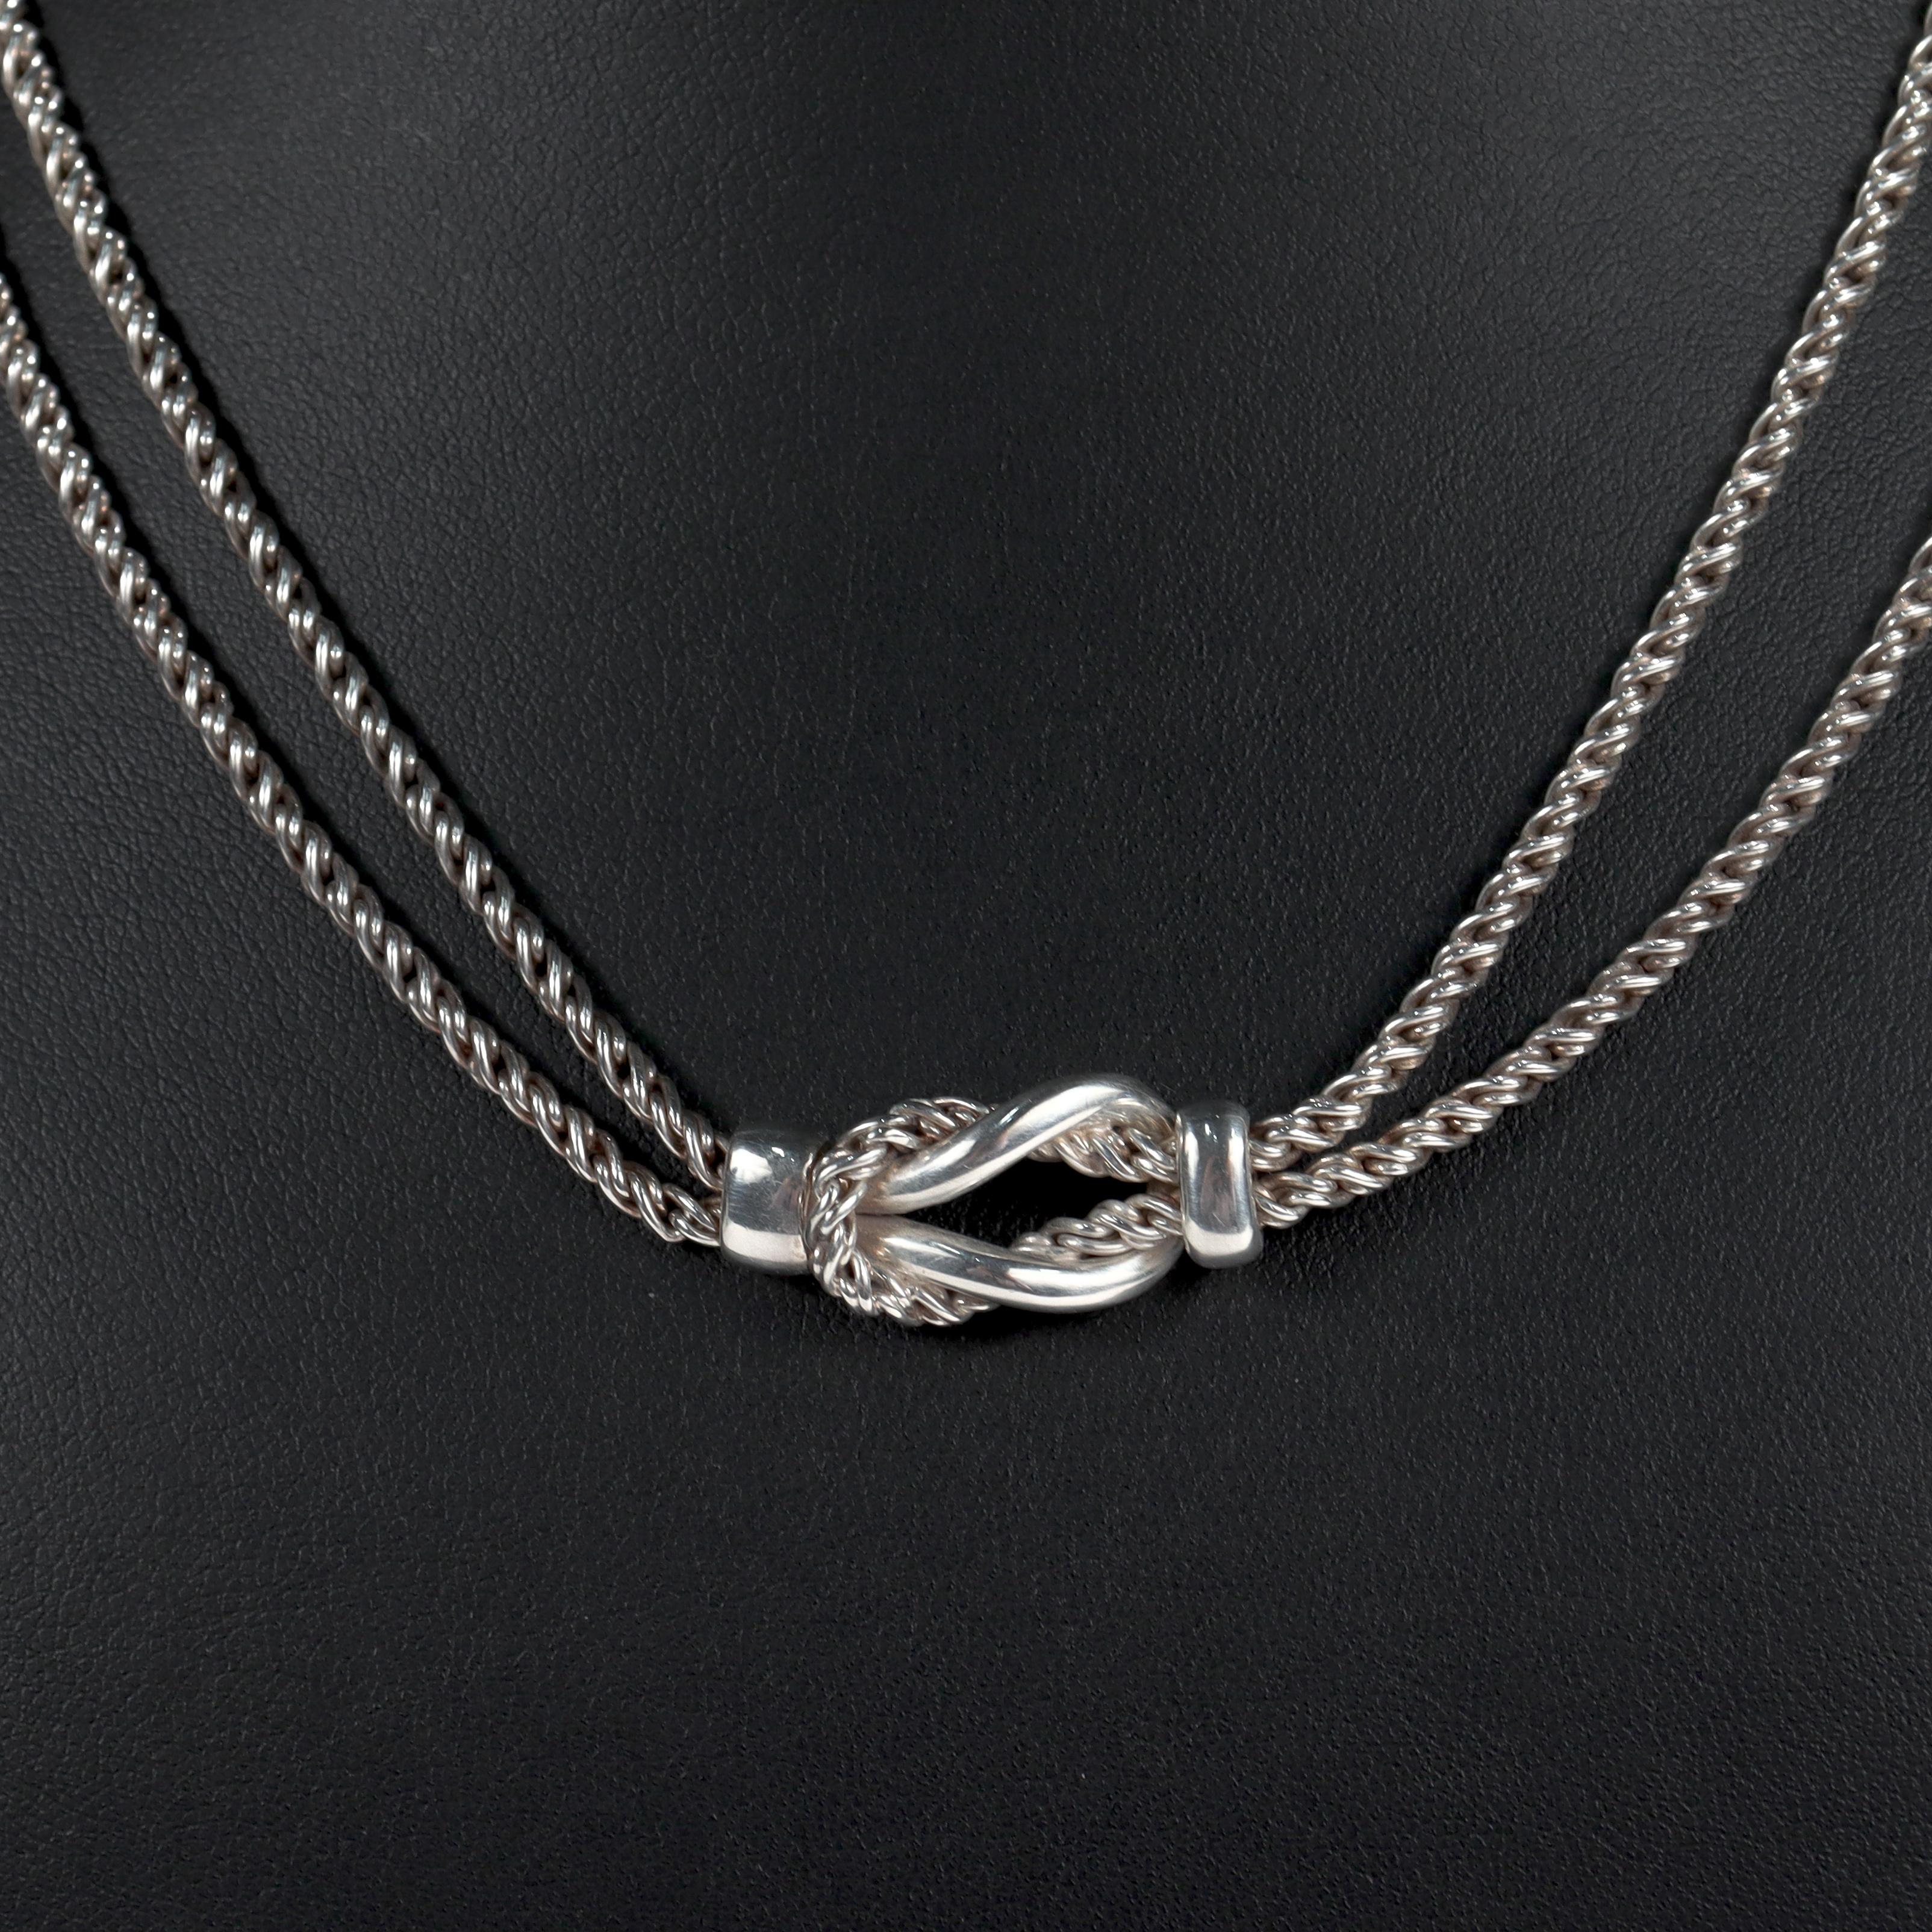 Women's Tiffany & Co Sterling Silver Double Love Knot Rope Chain Necklace